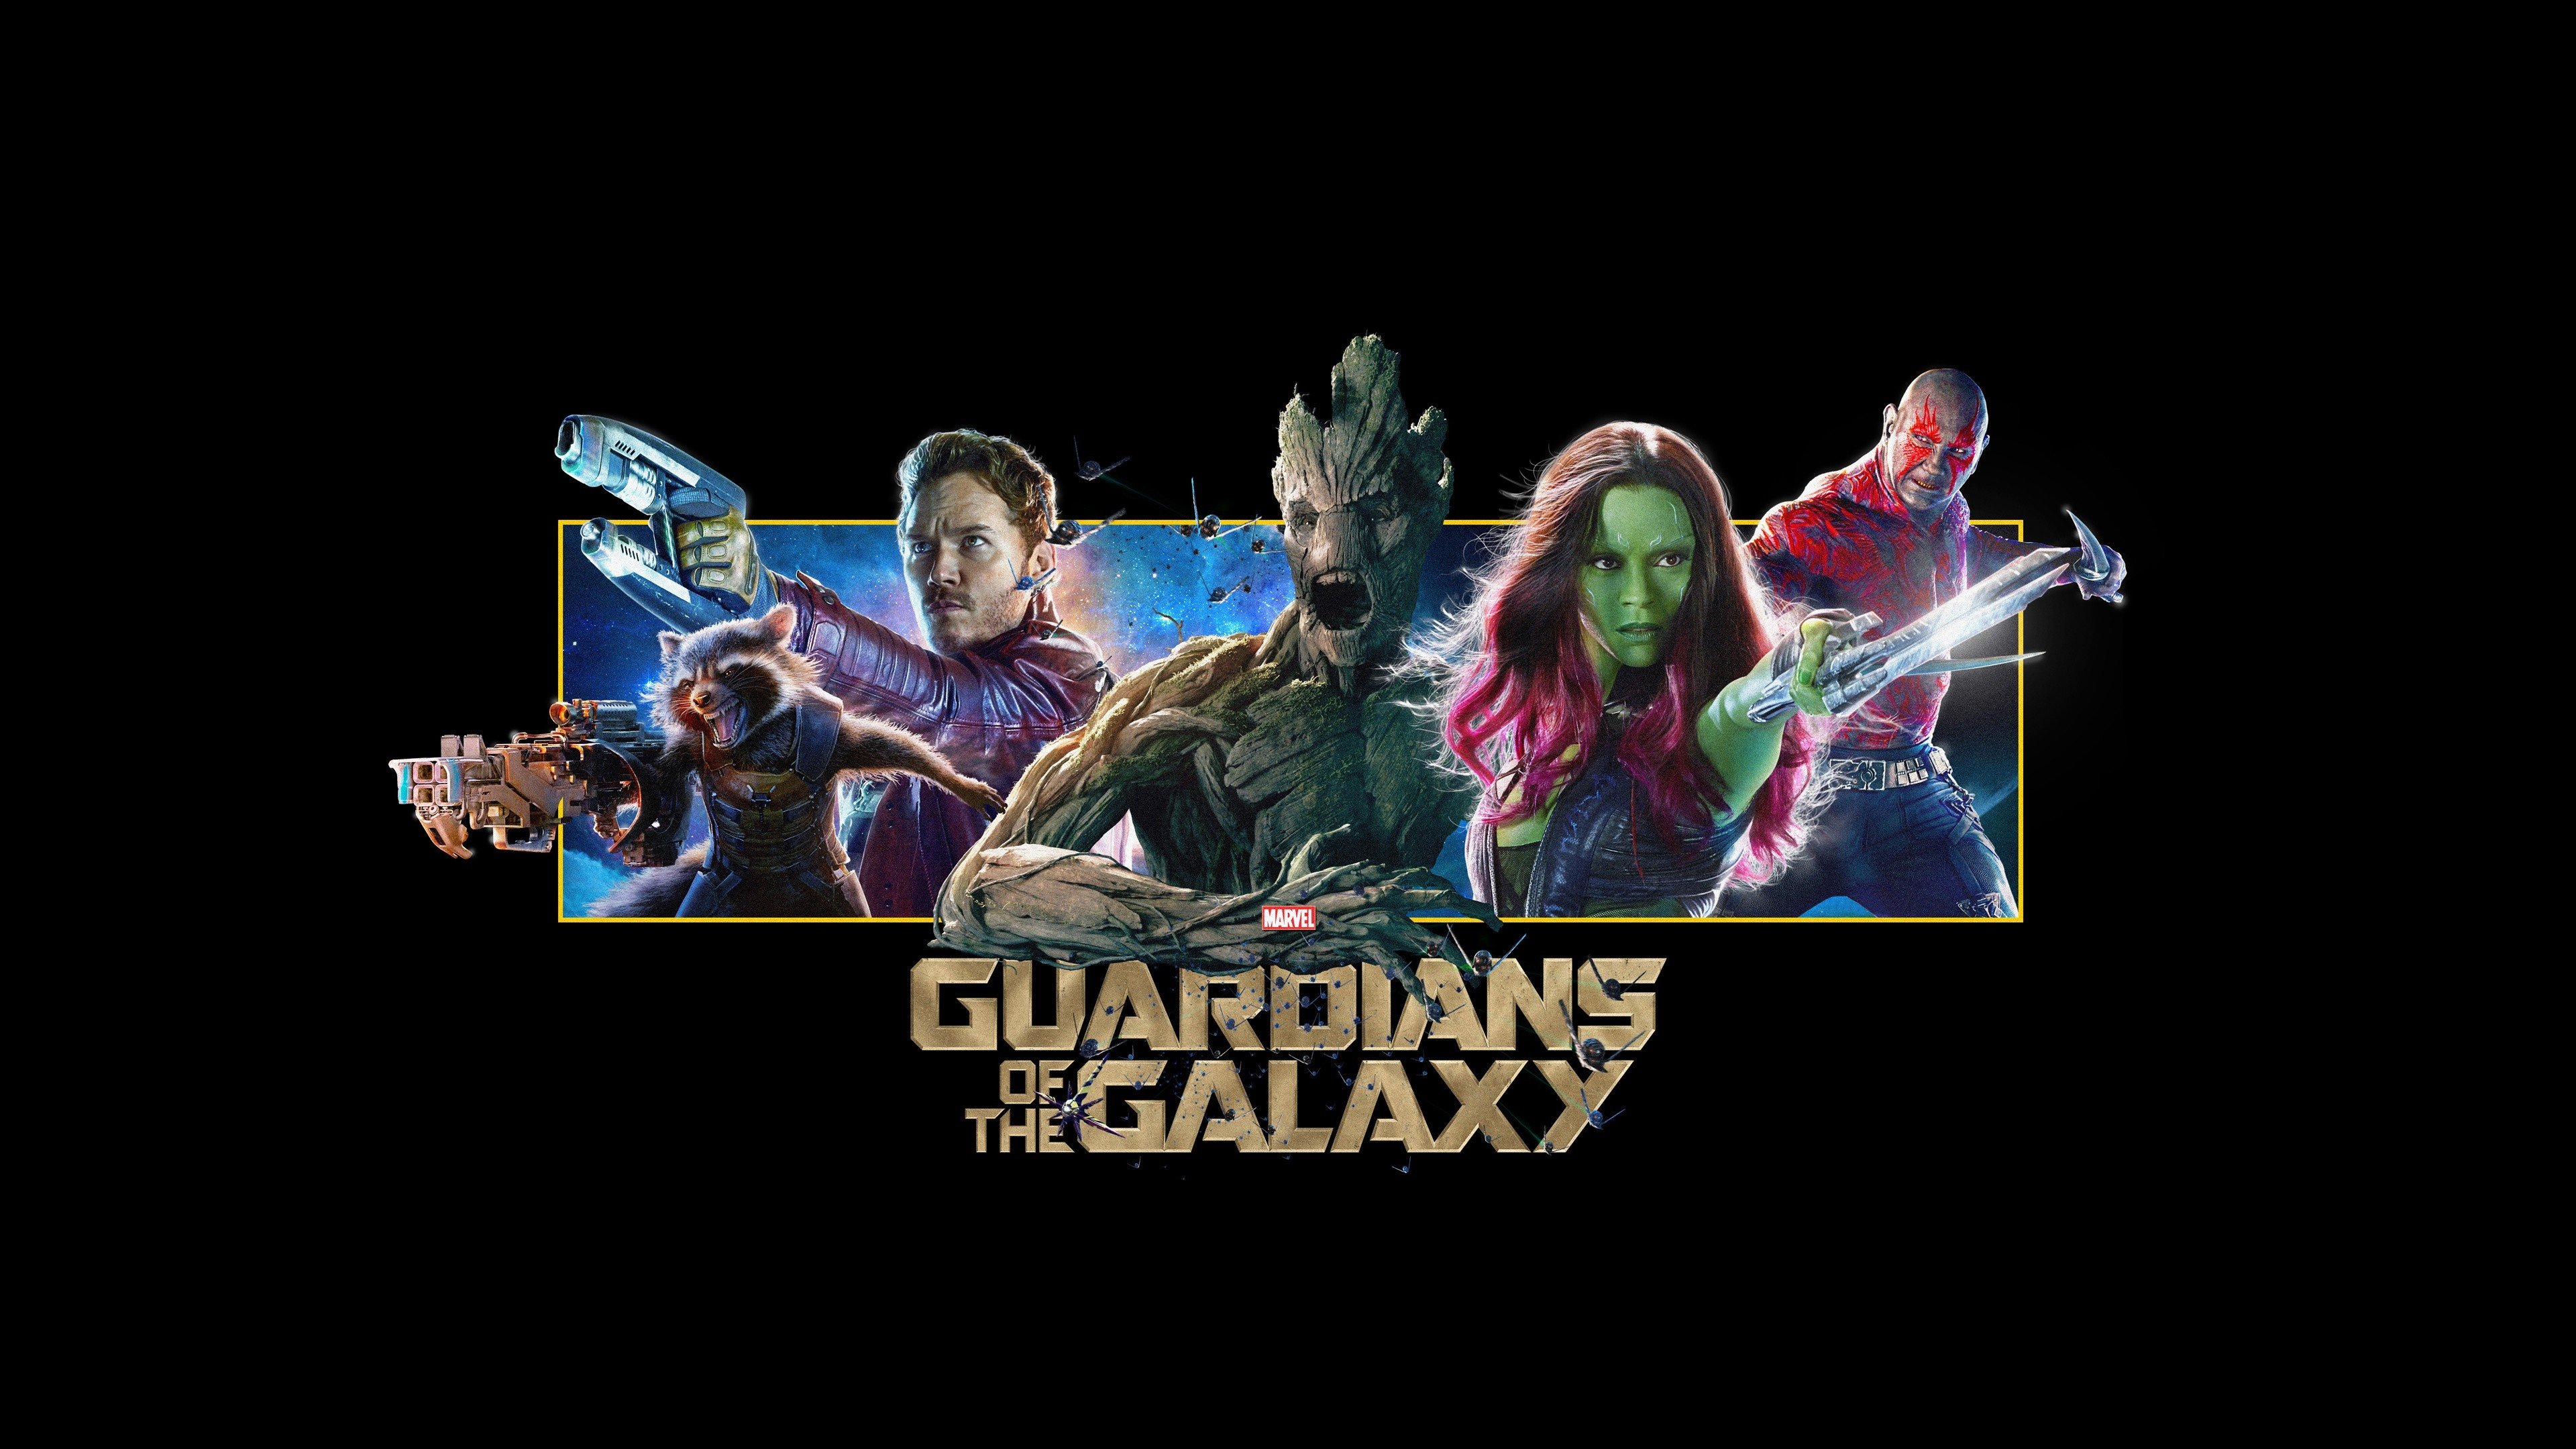 Guardians of the Galaxy, Typography, Marvel Comics, Black background Wallpaper